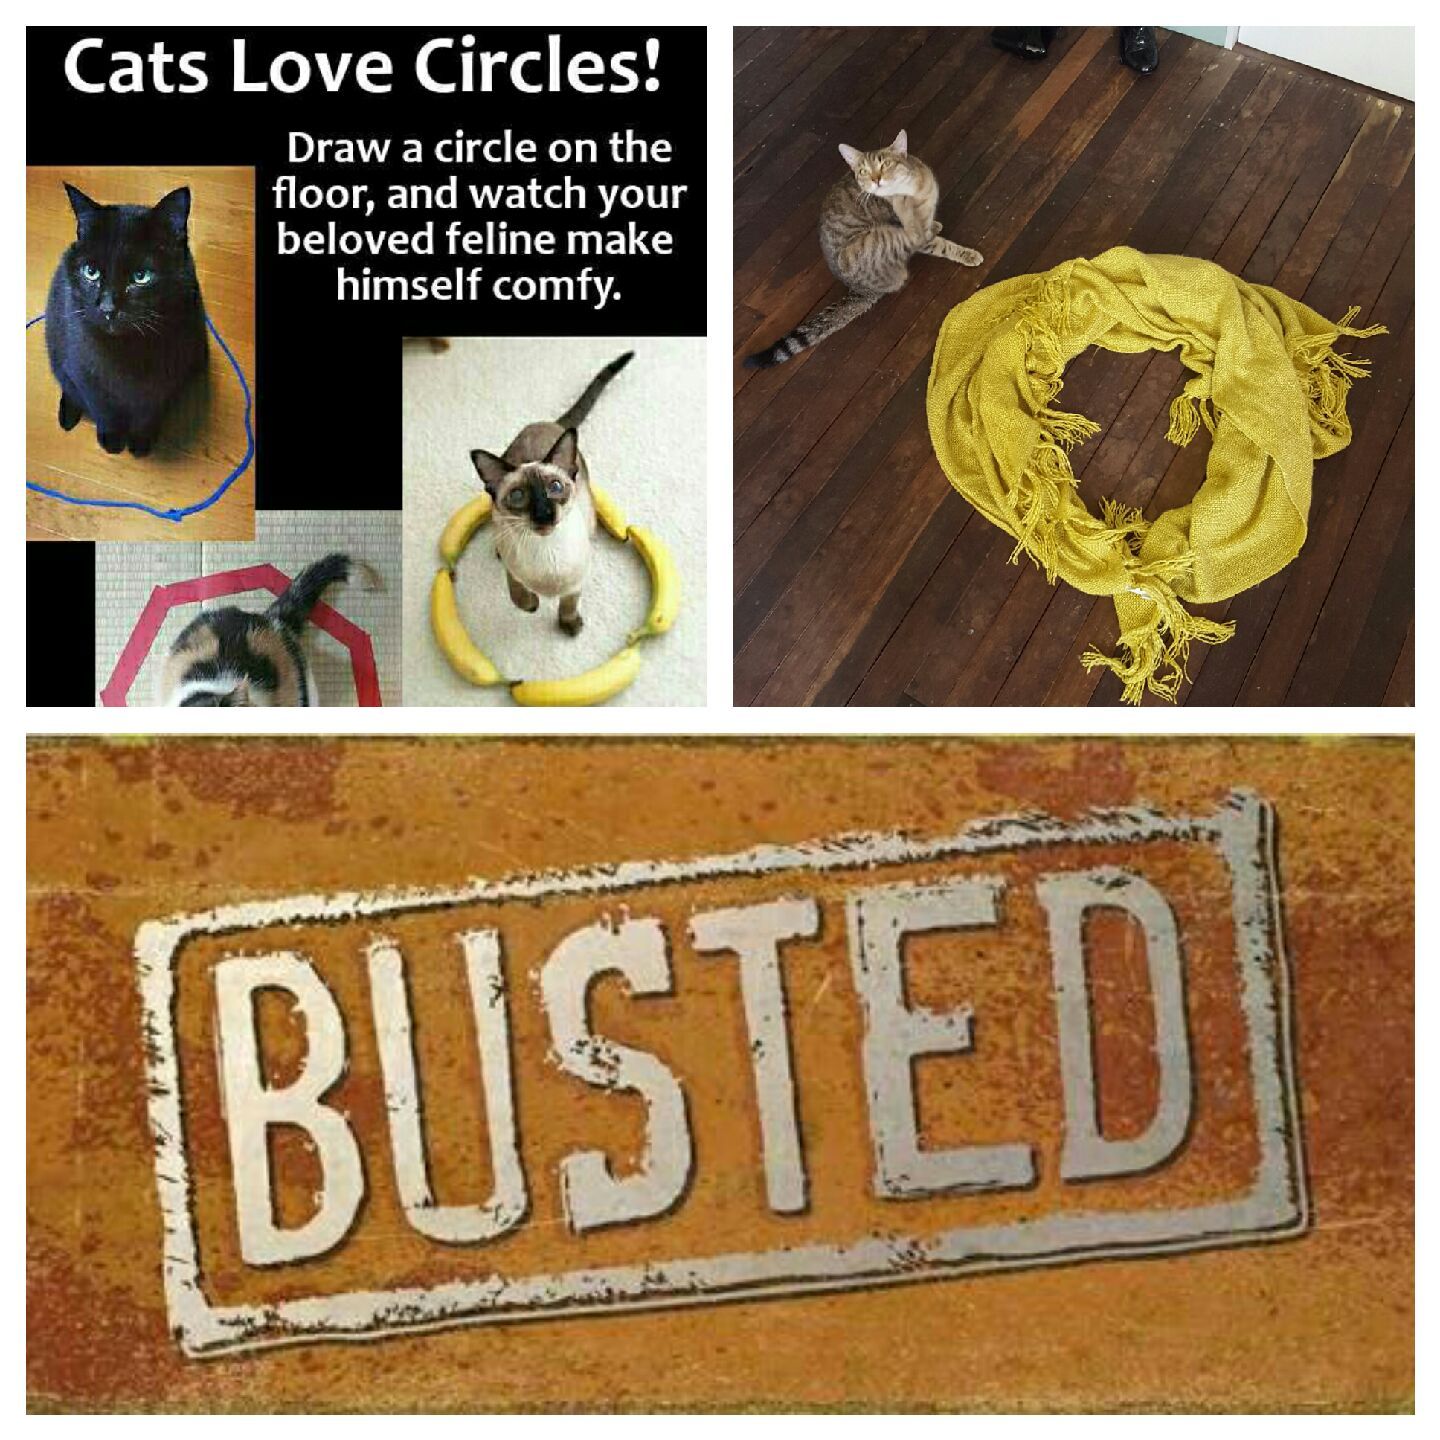 busted - meme